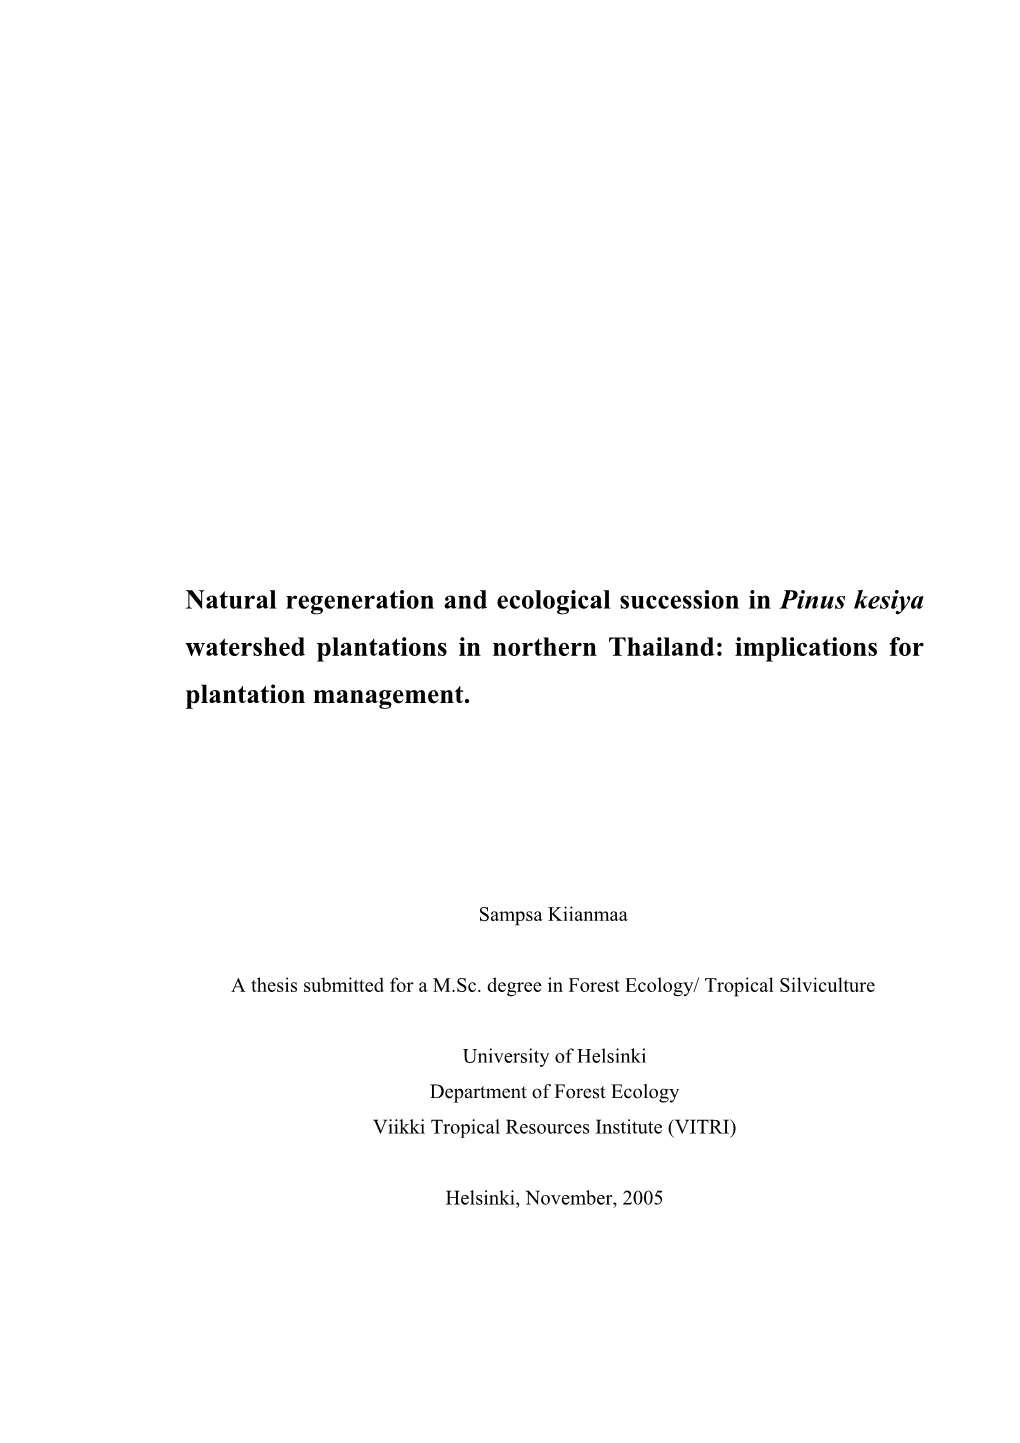 Natural Regeneration and Ecological Succession in Pinus Kesiya Watershed Plantations in Northern Thailand: Implications for Plantation Management